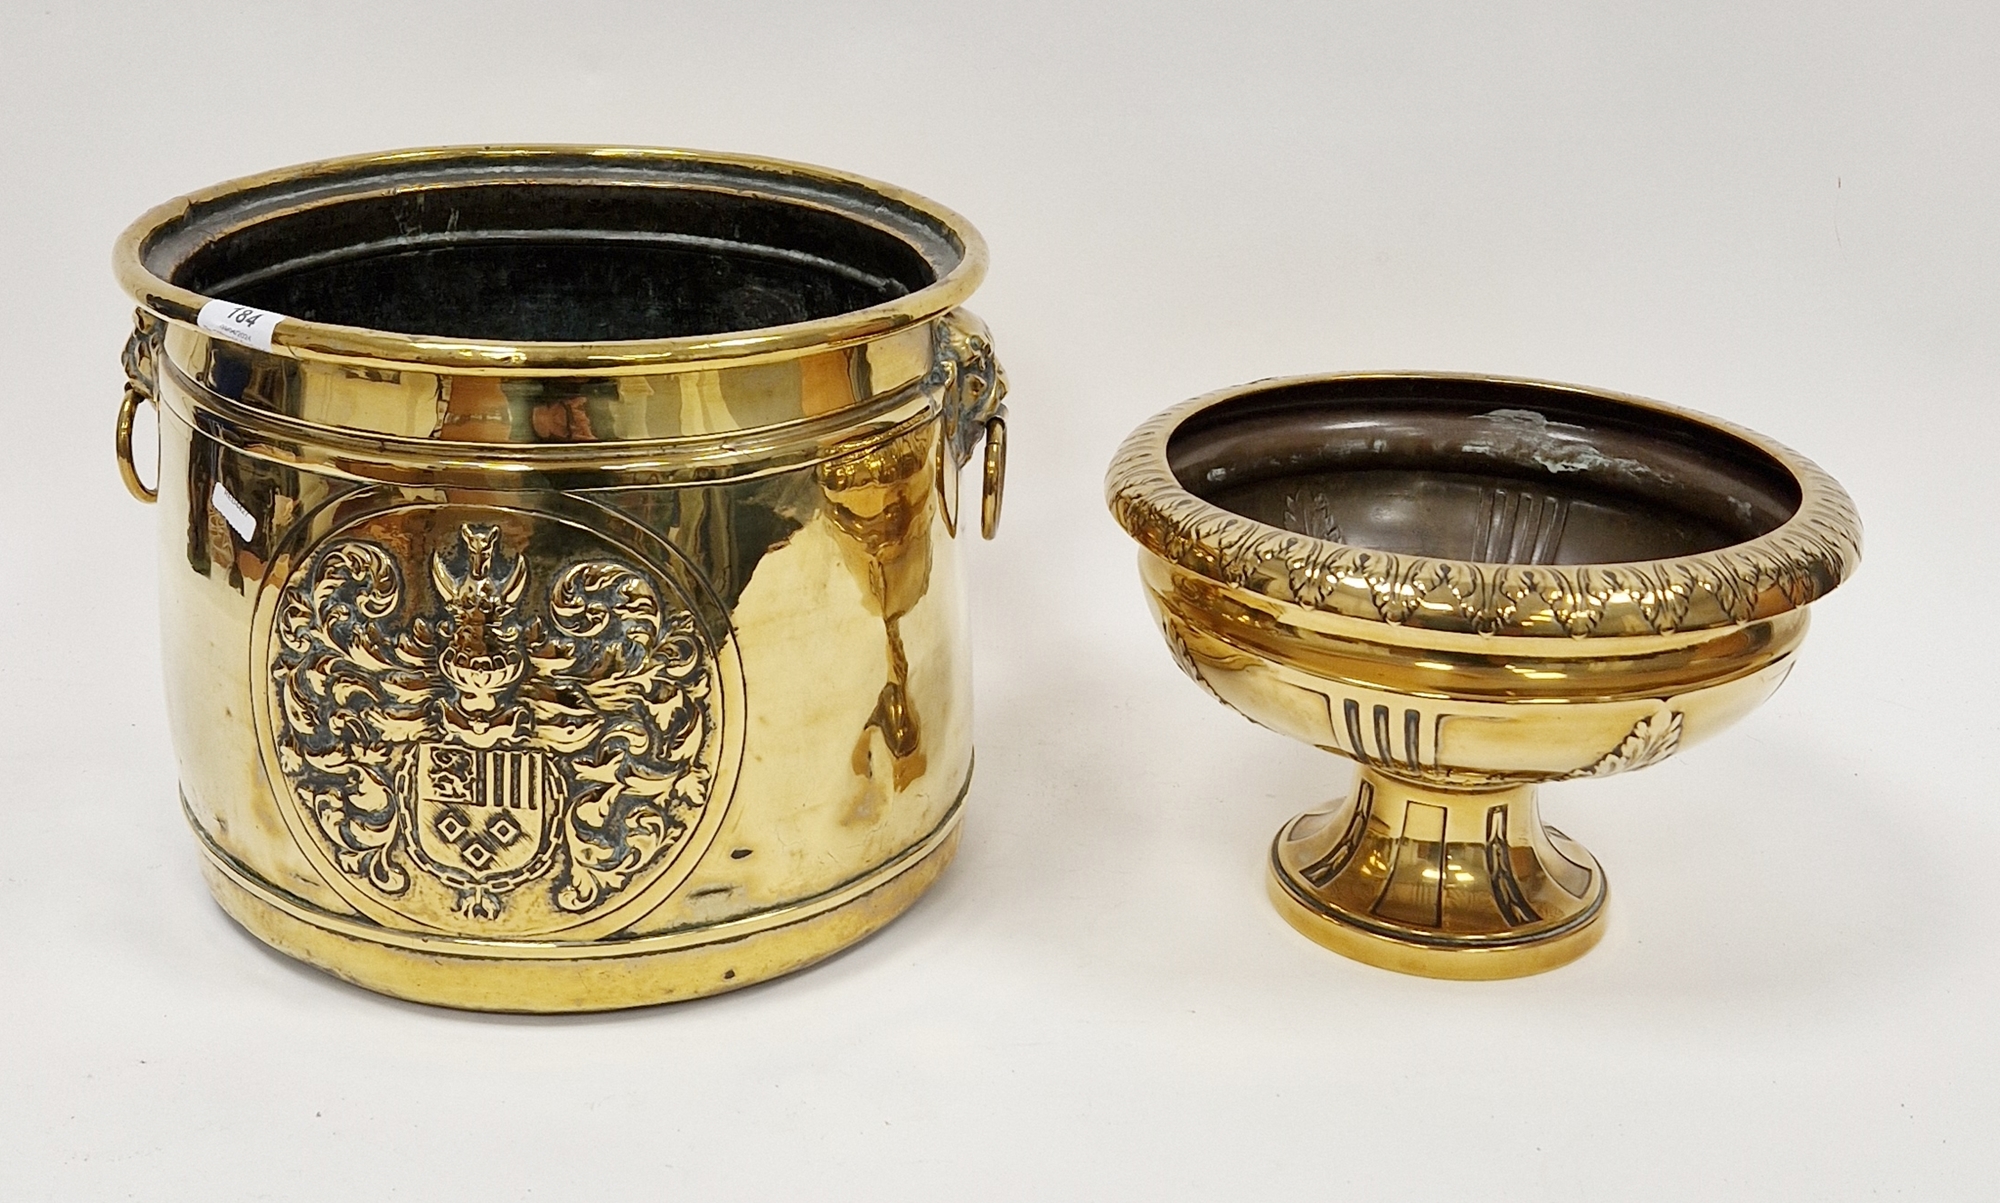 Edwardian embossed brass coal scuttle of cylindrical form, decorated with a mantled armorial, with - Image 2 of 2